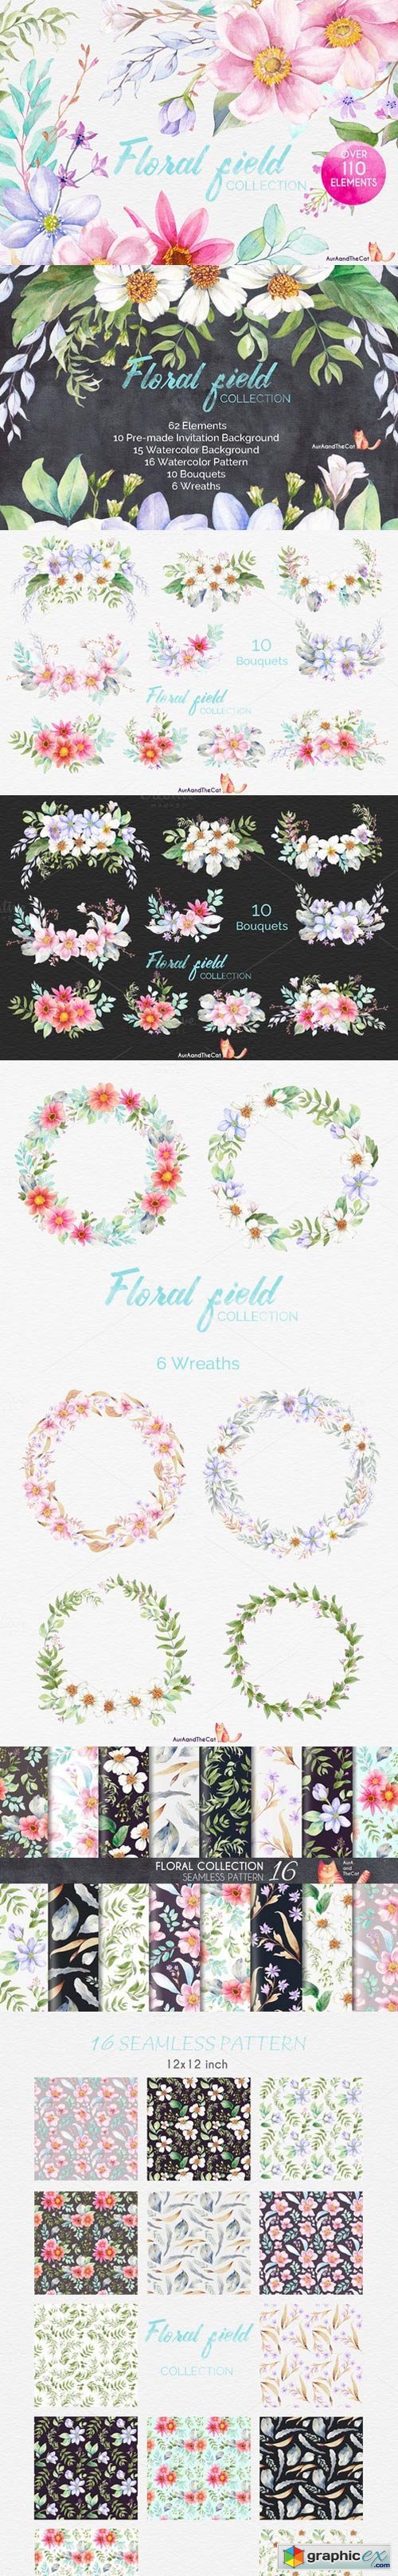 FLORAL FIELD collection